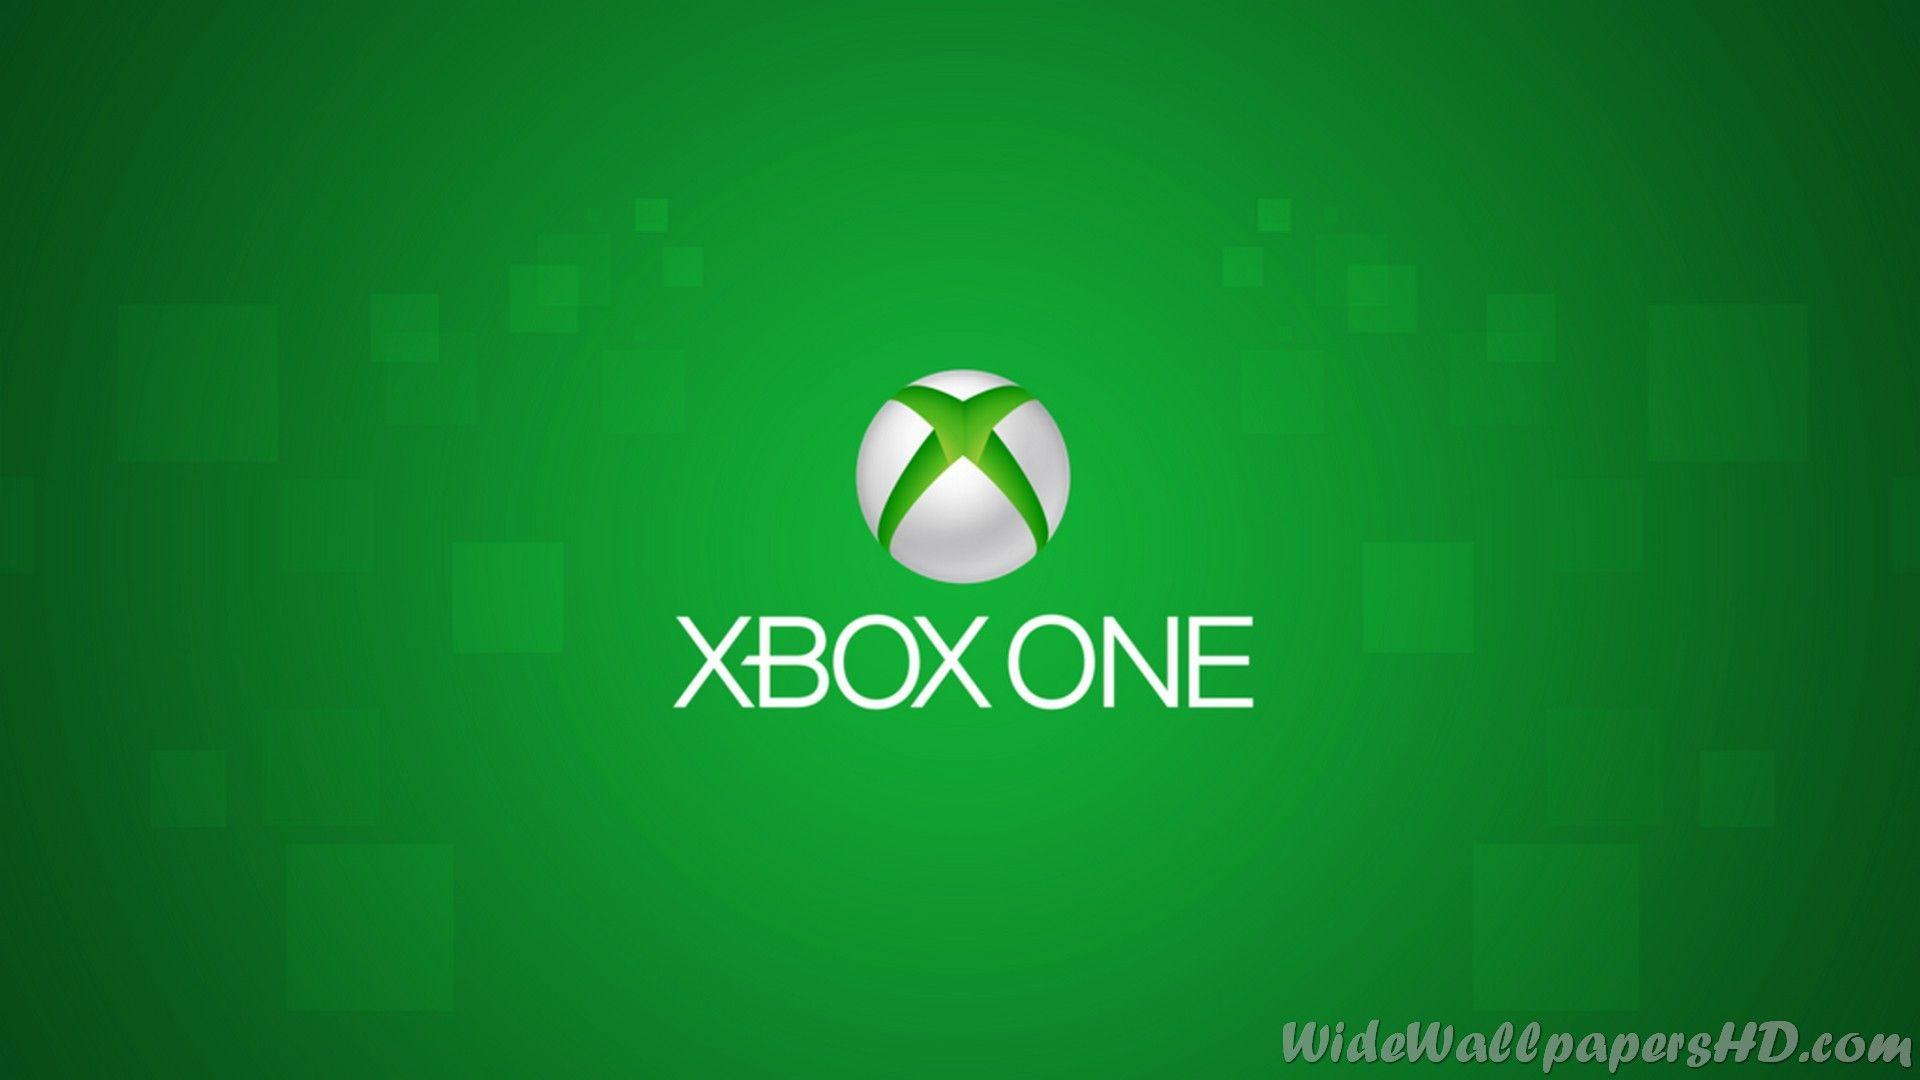 Xbox One Image Gallery. Wide Wallpaper HD